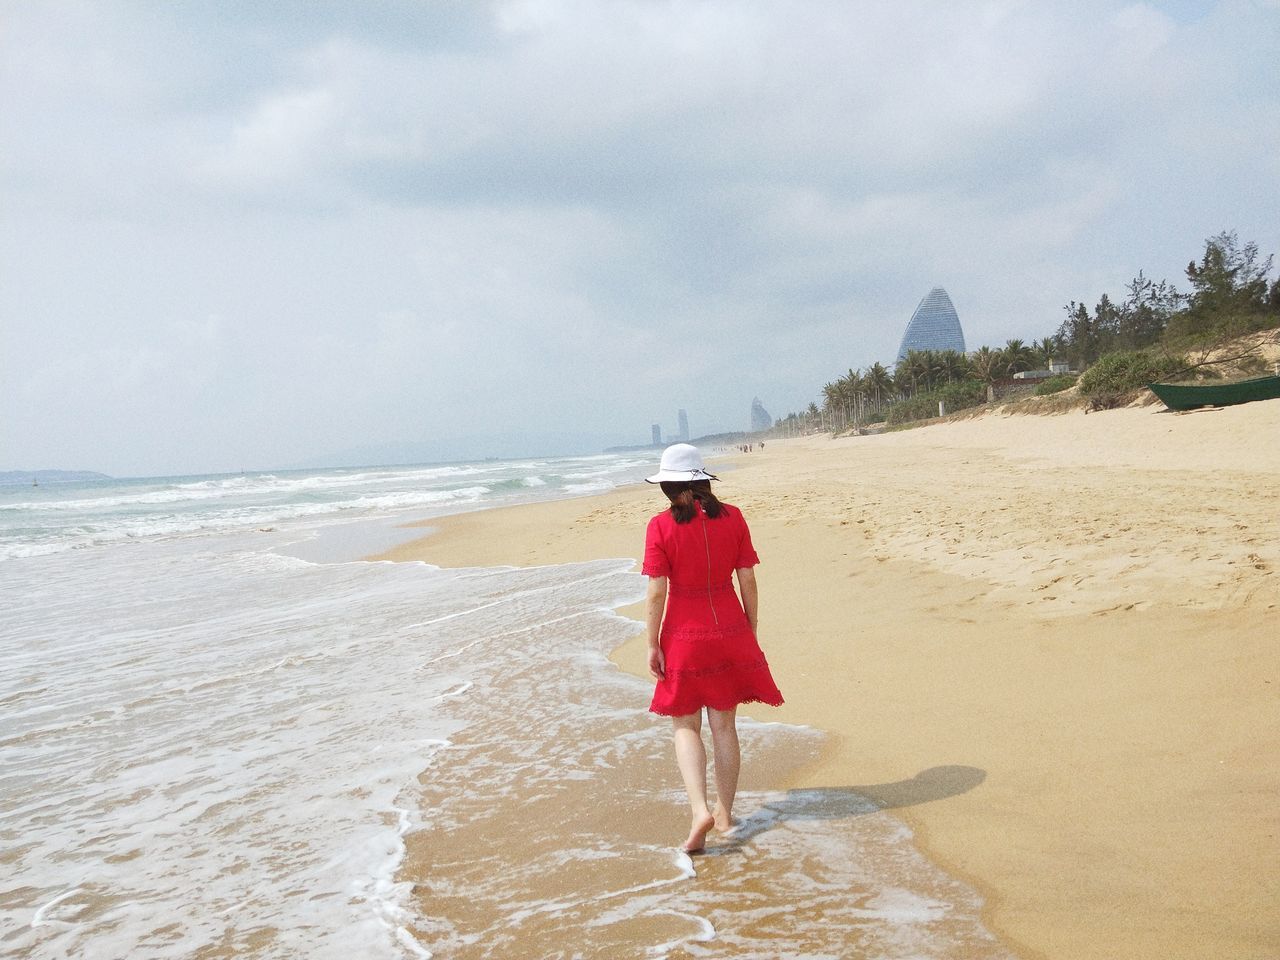 rear view, full length, sea, real people, sky, one person, walking, sand, standing, beauty in nature, beach, nature, cloud - sky, day, lifestyles, scenics, outdoors, water, leisure activity, red, horizon over water, ankle deep in water, wave, women, men, young adult, people